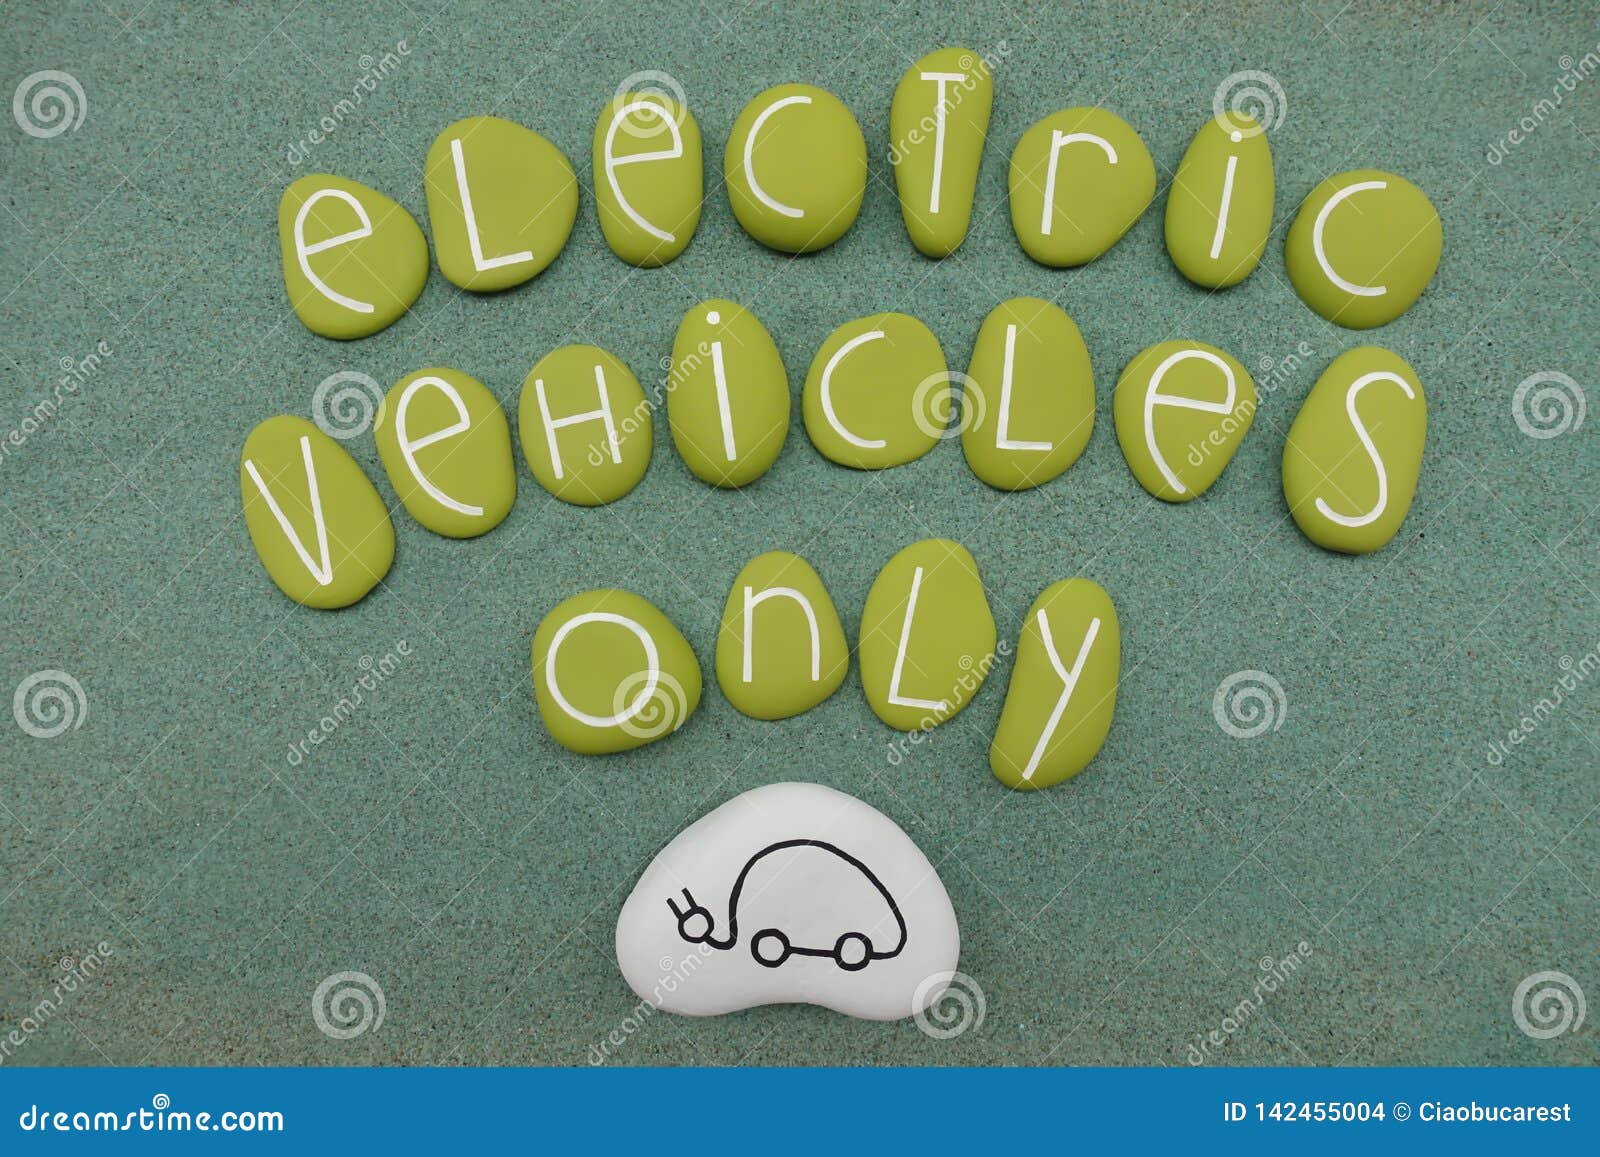 electric vehicles only text with green colored stones over green sand